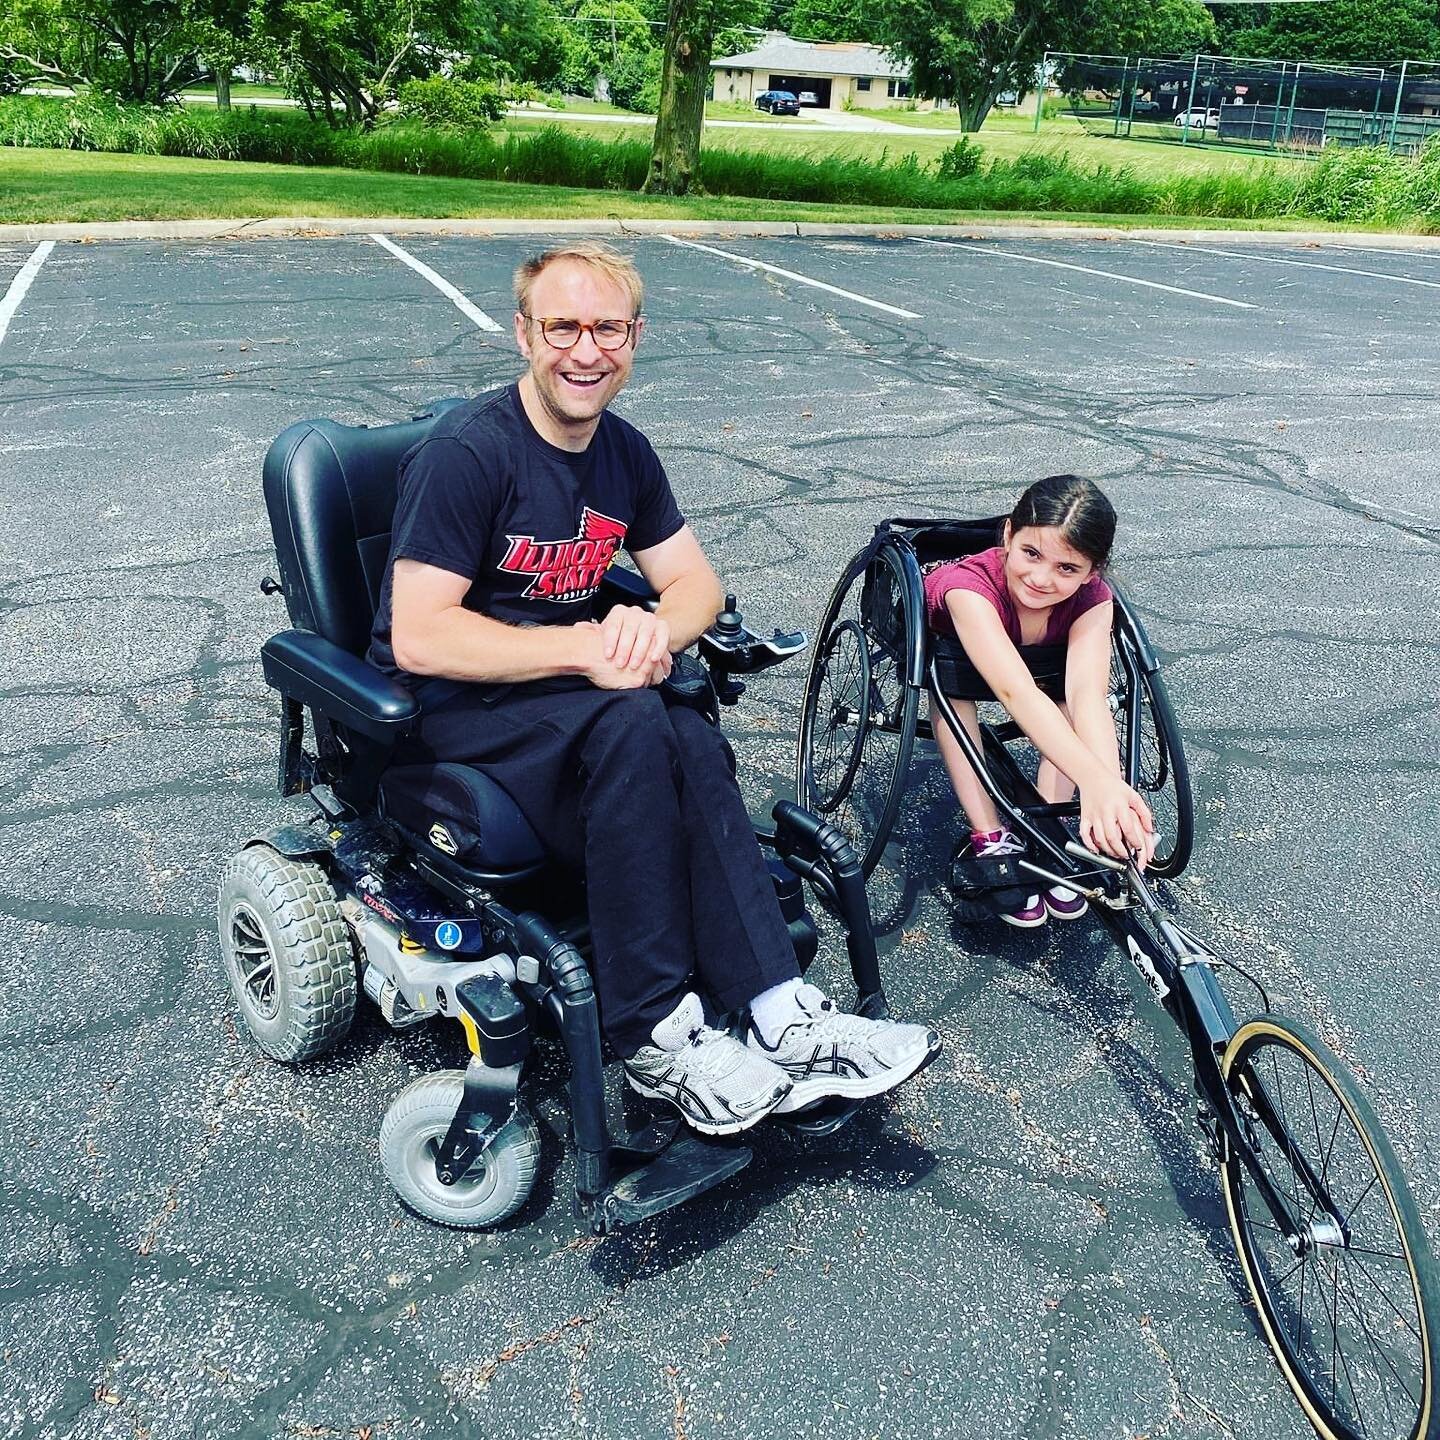 One chapter ended and another began this morning in the Wright Hall parking lot! Excited for Rae as she starts her racing career in a rather familiar chair...This chair carried me thousands of miles, taught me countless lessons and made innumerable m